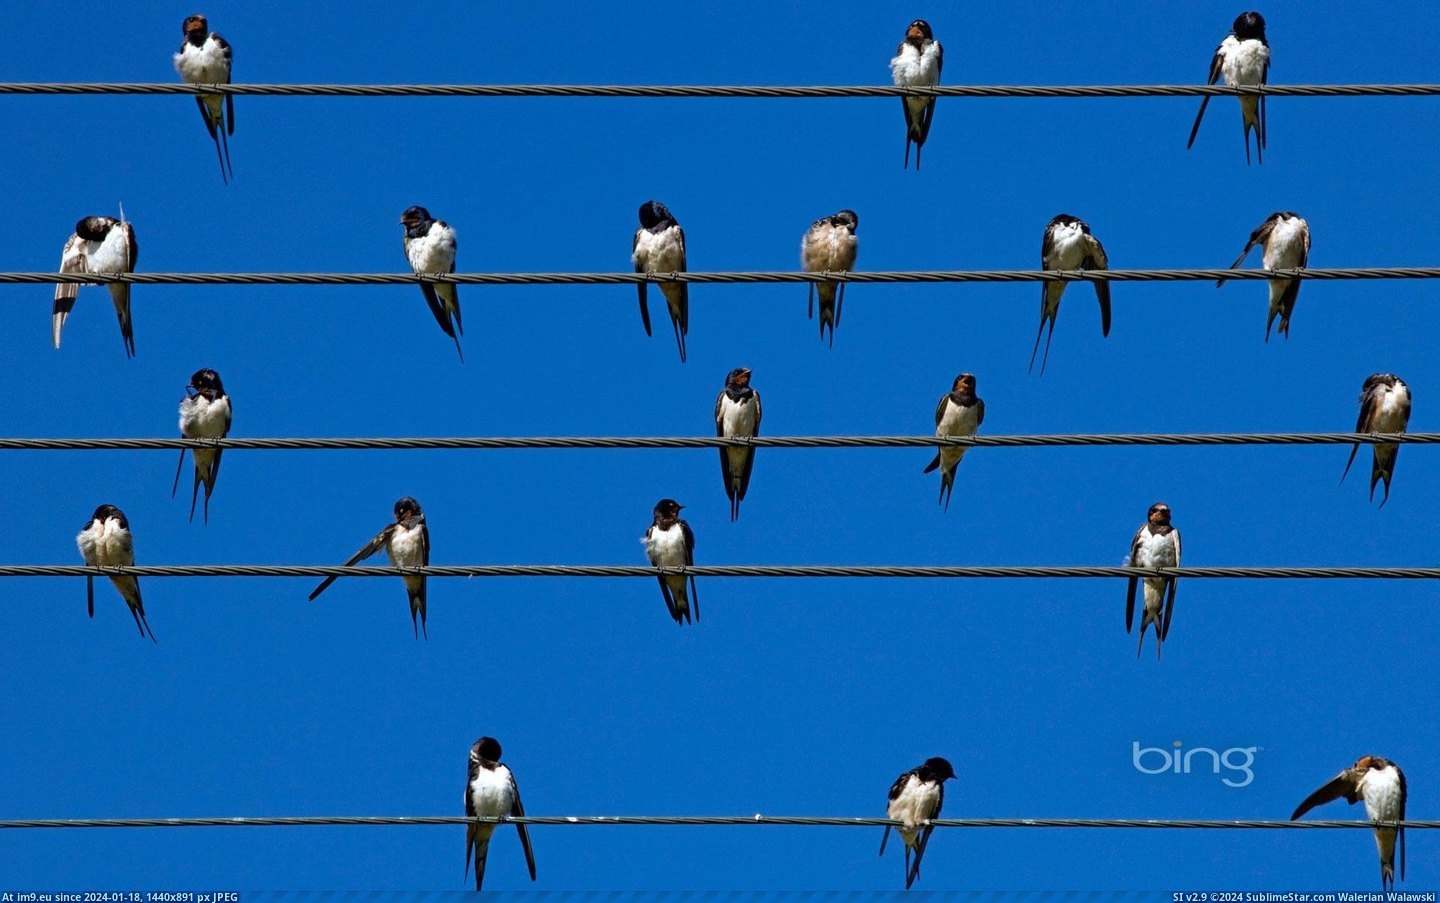 Barn swallows on wires, Overberg, Western Cape, South Africa (in Bing Photos November 2012)